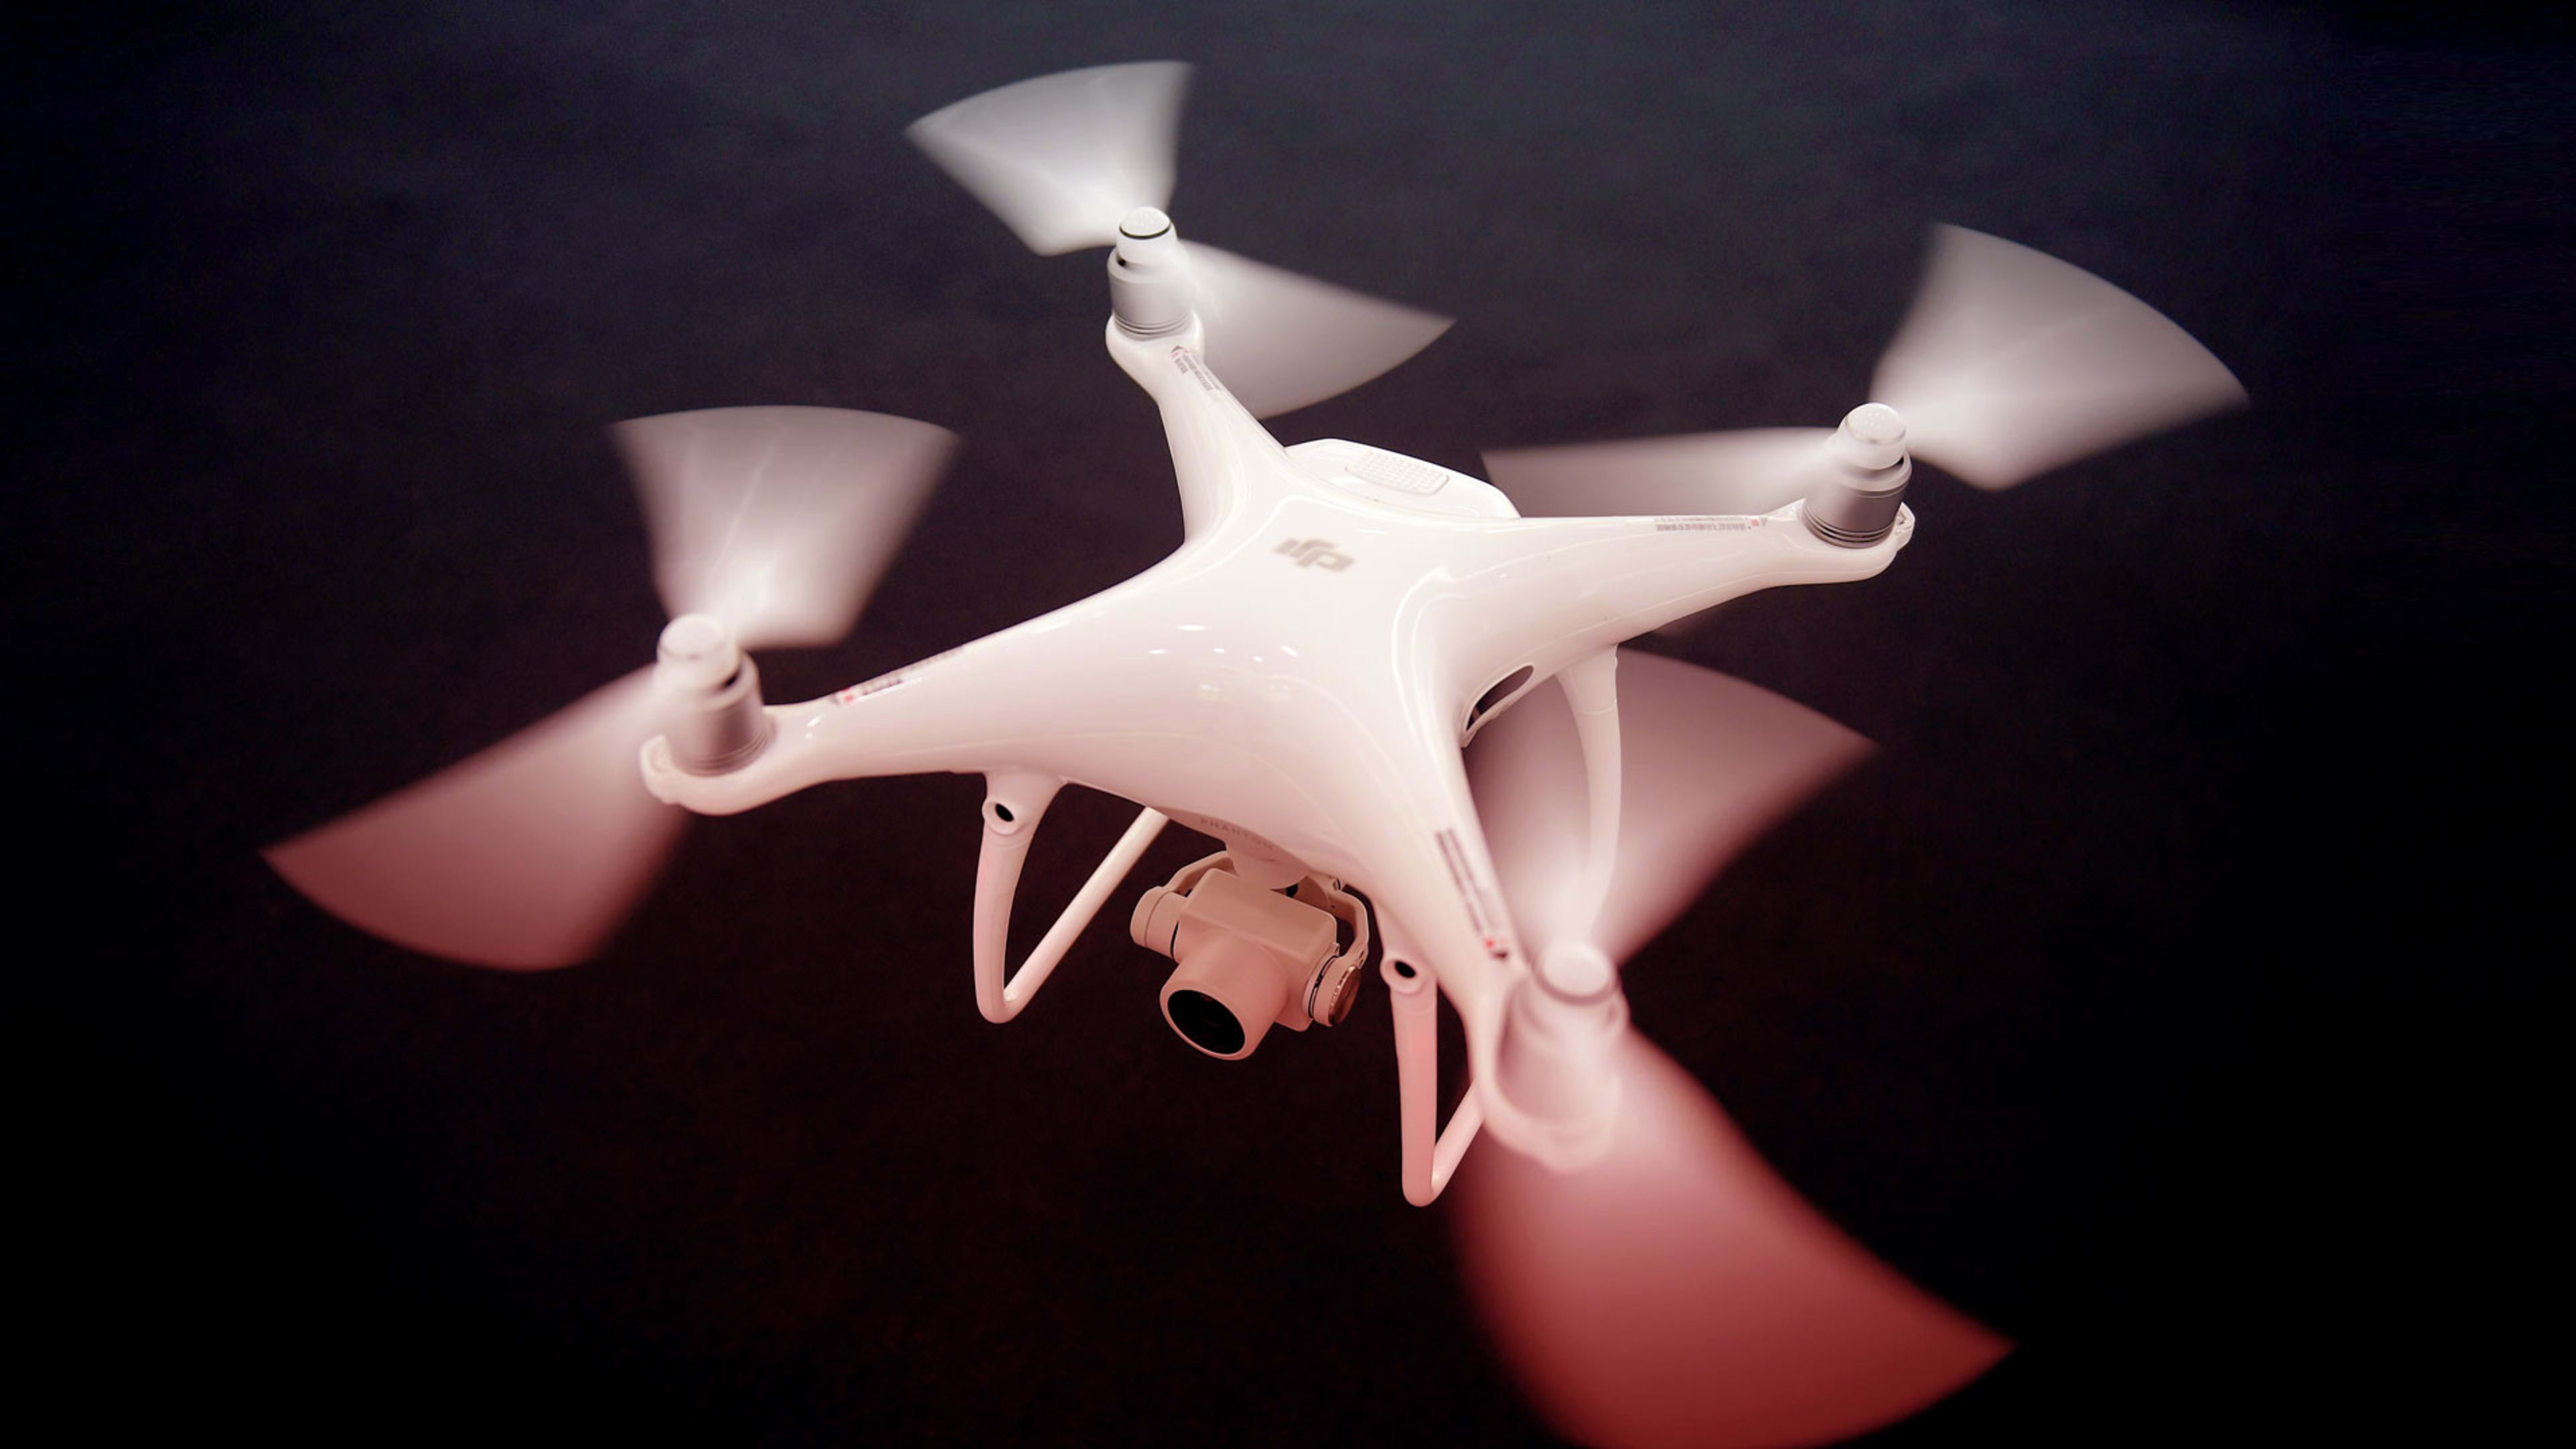 Drone Giant DJI To Feds: Your Allegations Are “Insane”